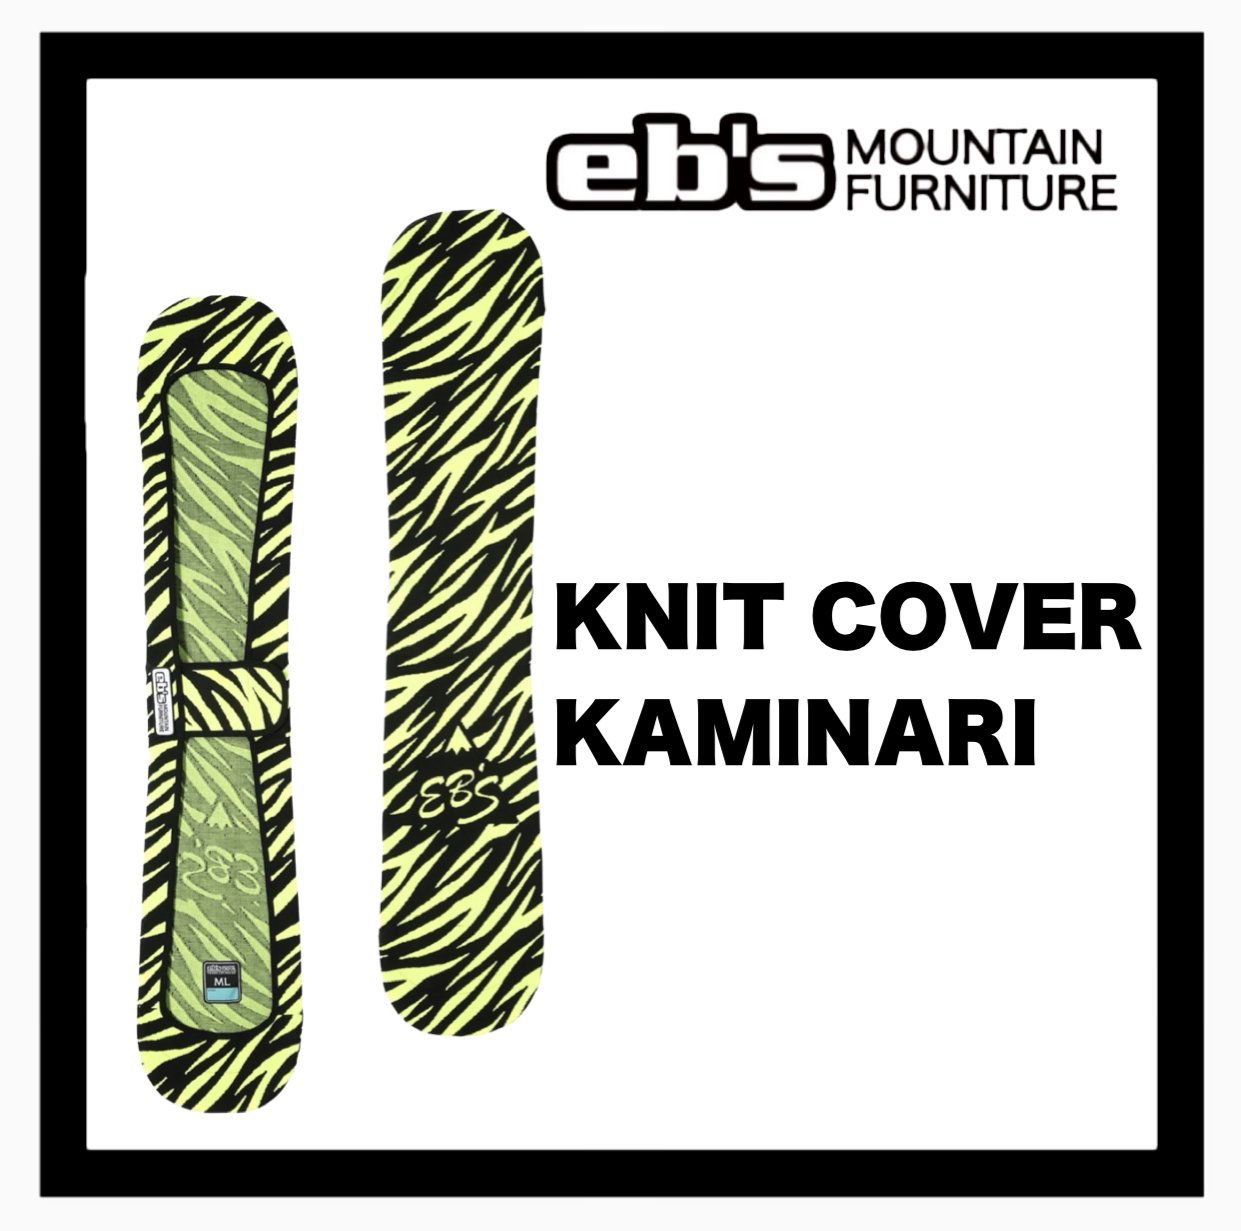 <img class='new_mark_img1' src='https://img.shop-pro.jp/img/new/icons14.gif' style='border:none;display:inline;margin:0px;padding:0px;width:auto;' />eb'sKNIT COVER : KAMINARI